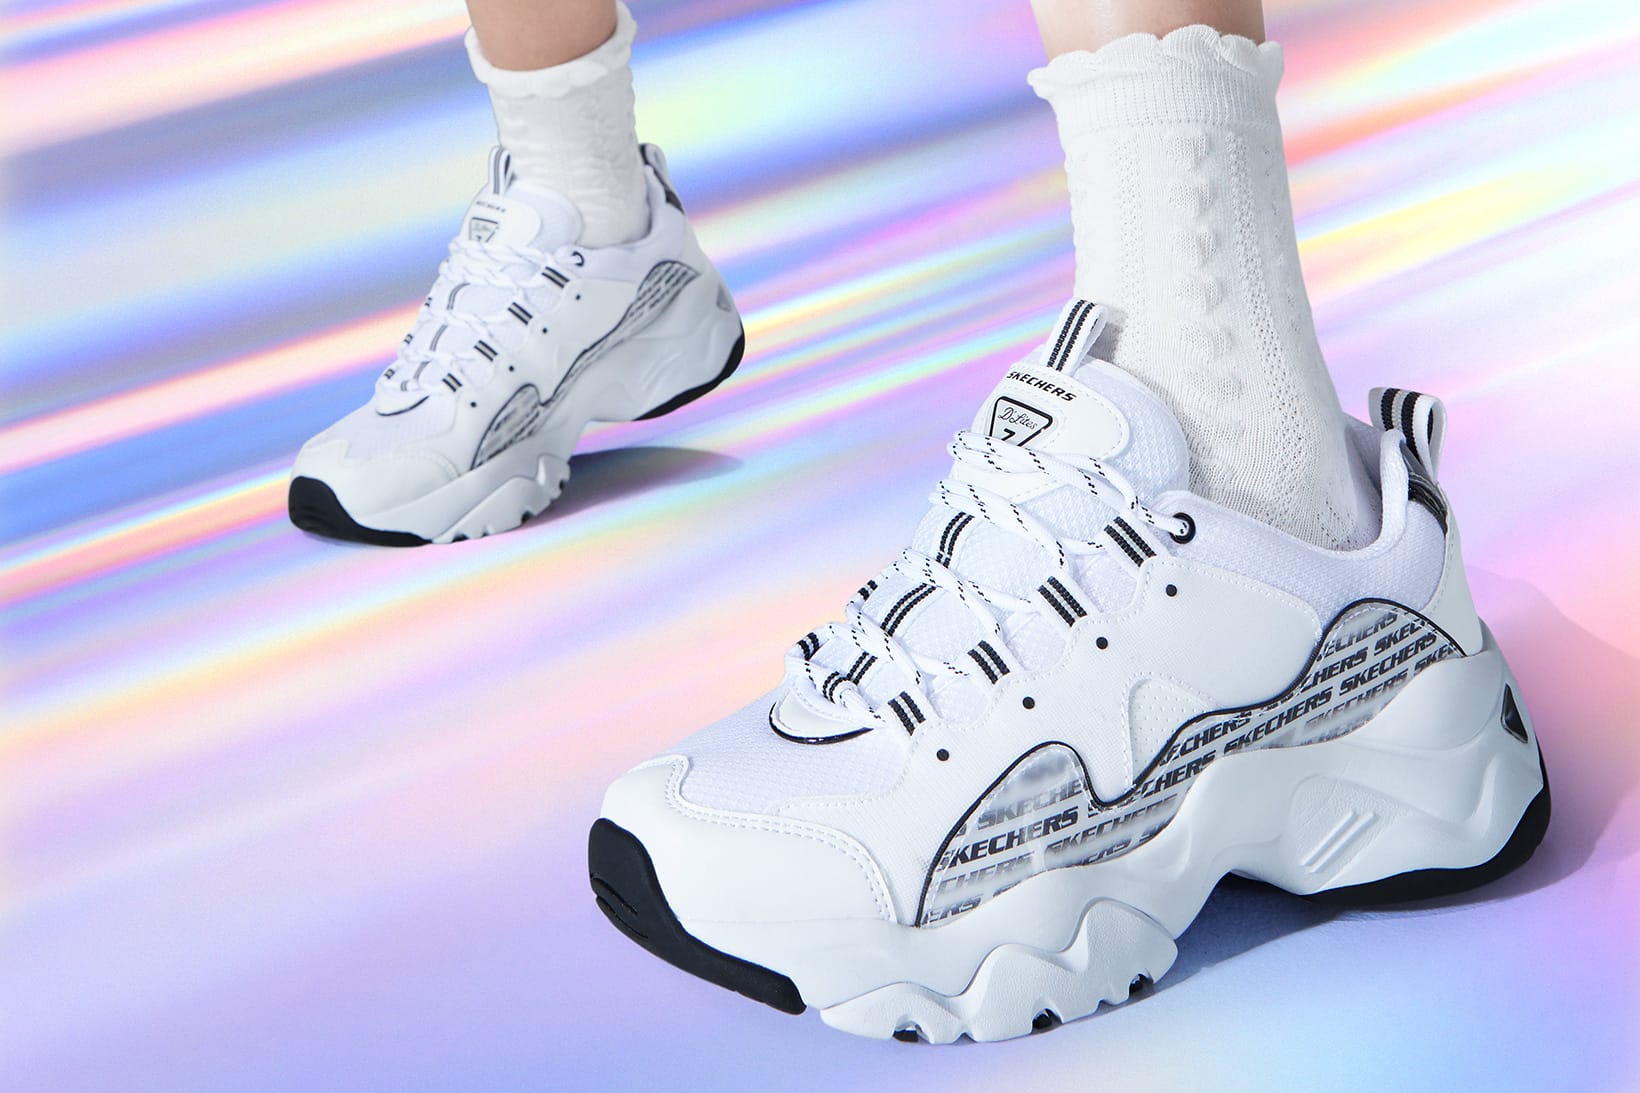 skechers new collection